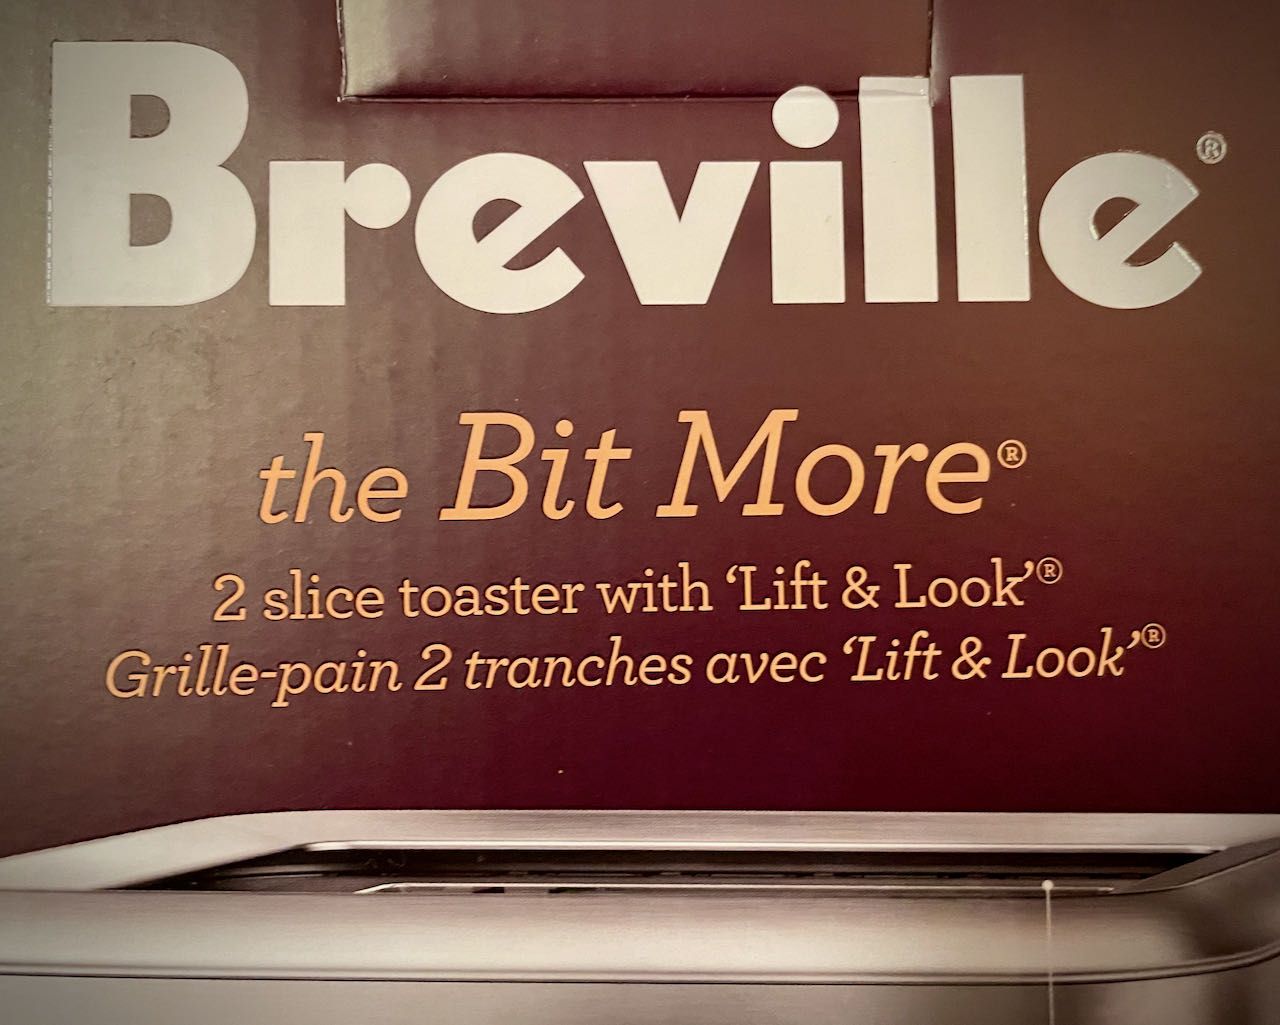 The box for the Breville "the Bit More" toaster